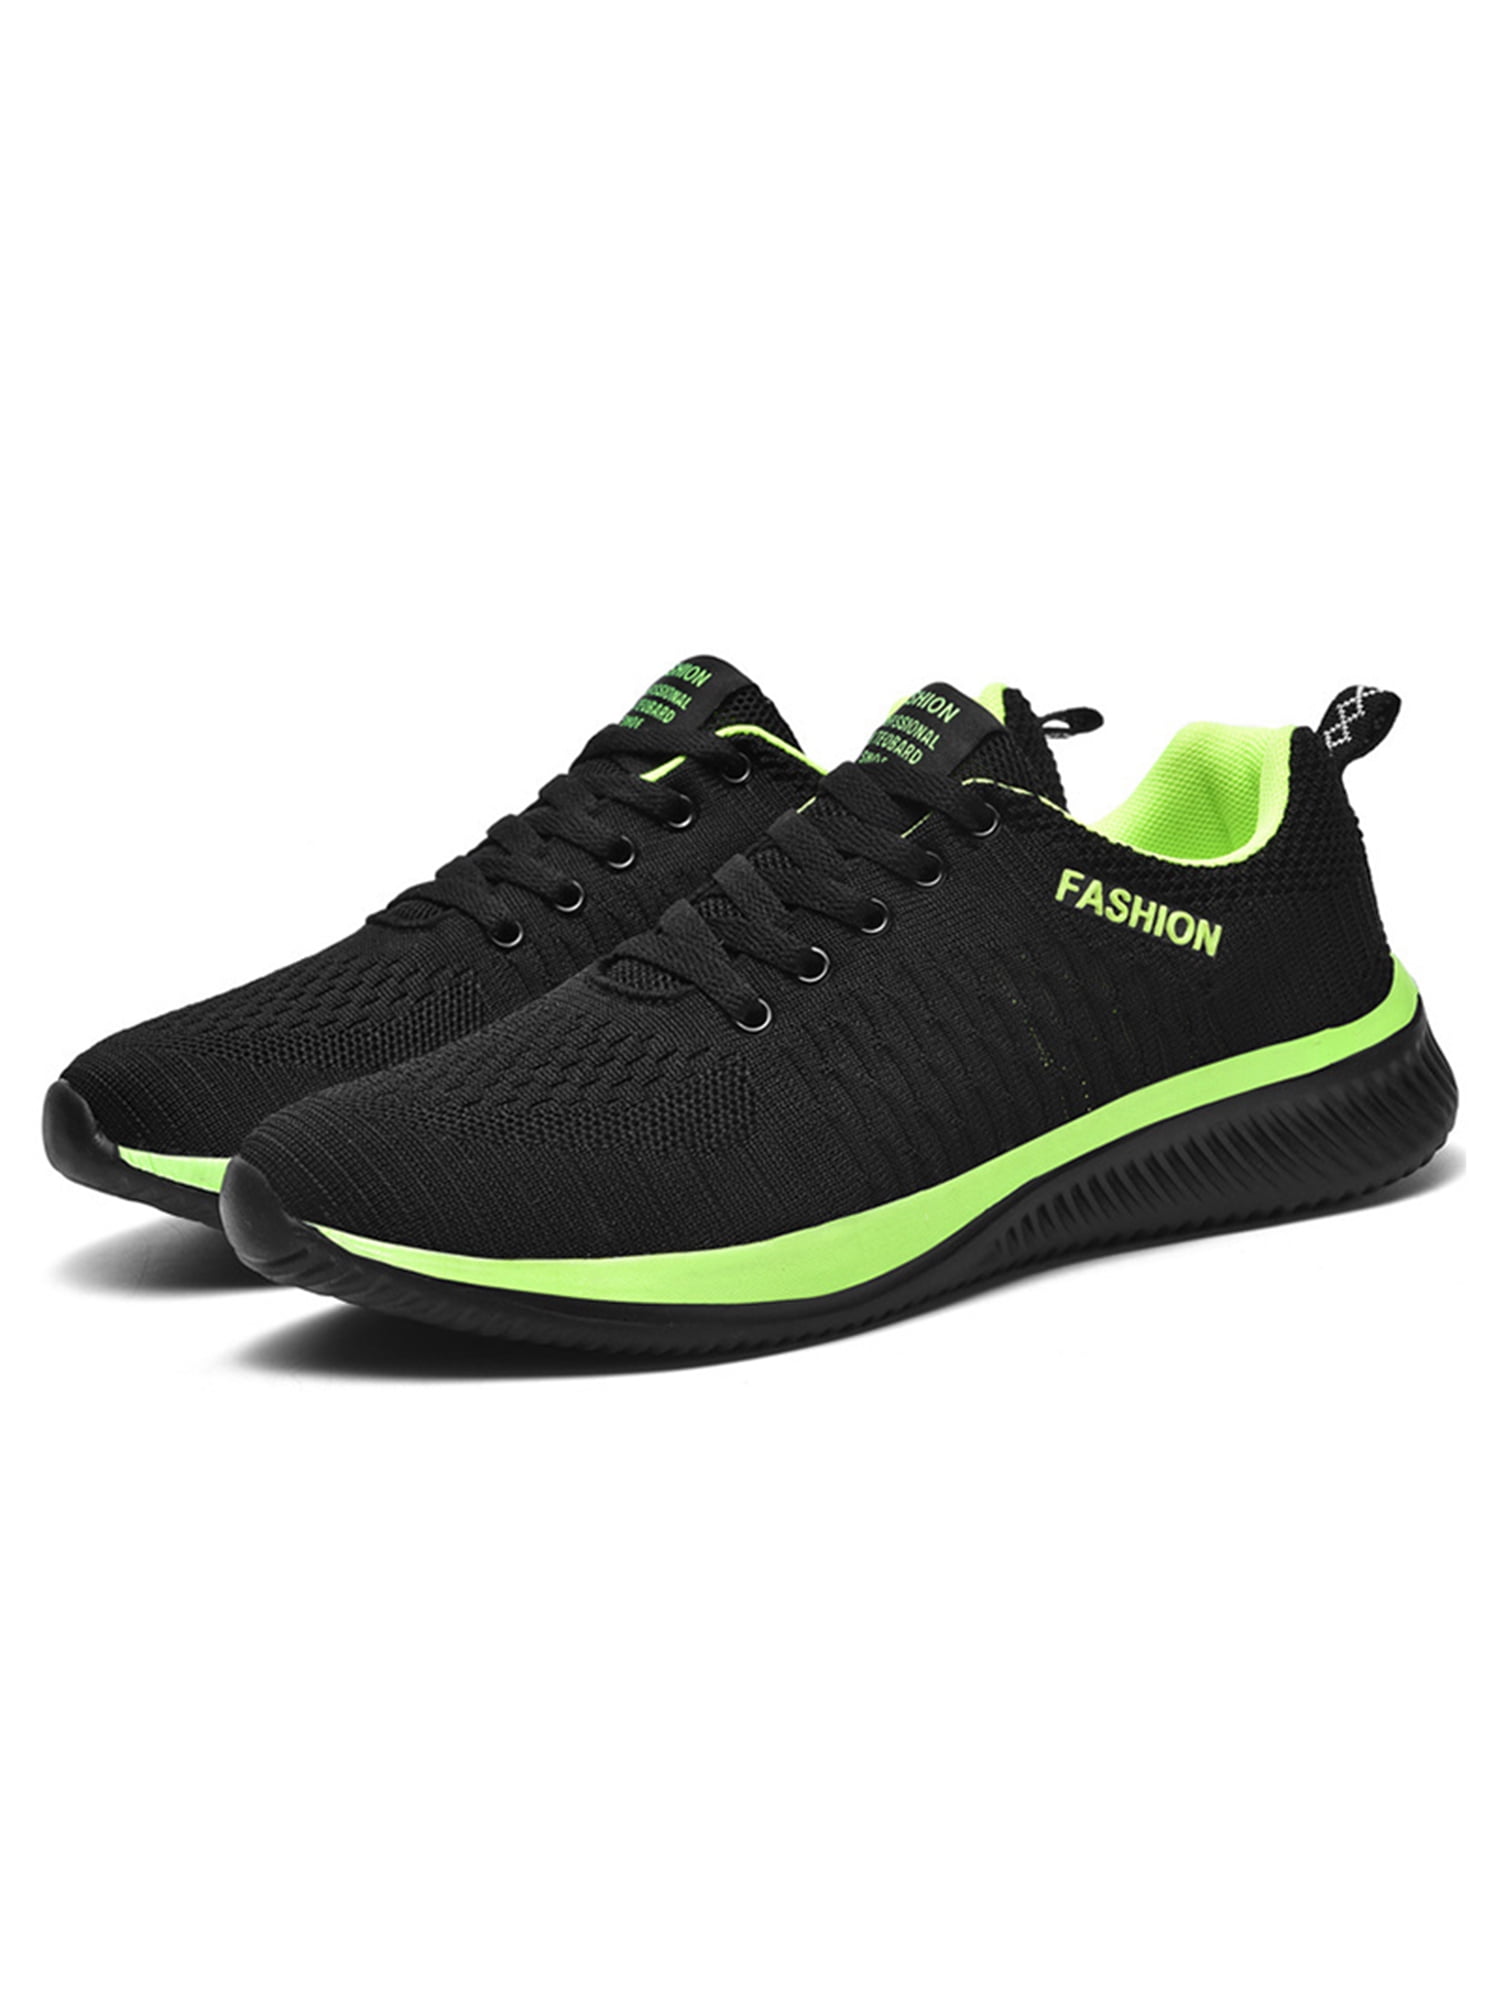 Sanviglor Mens Athletic Shoes Sports Running Fitness Workout Sneakers ...